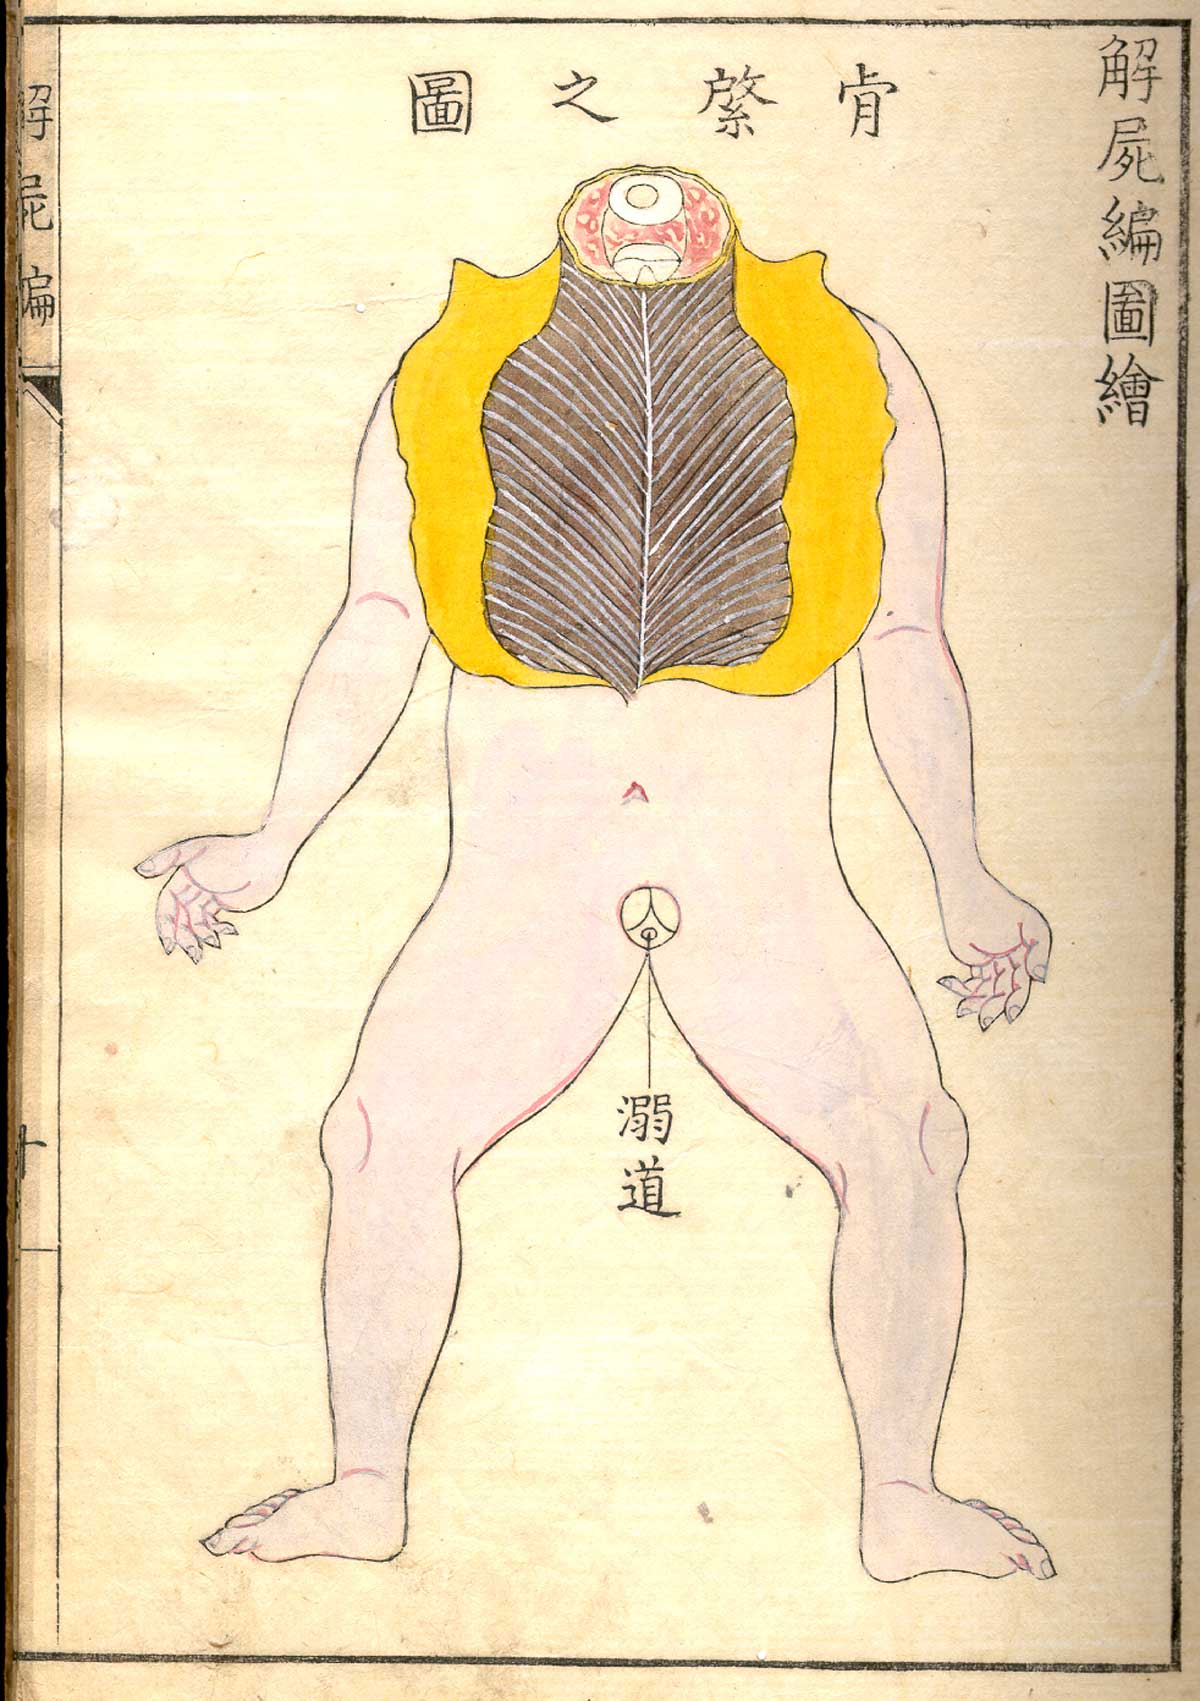 Hand colored woodcut of a facing nude female figure, decapitated, with skin of the upper torso pulled back to reveal the ribcage with Japanese text describing the structures, from Shinnin Kawaguchi's Kaishi hen, NLM Call no.: WZ 260 K21k 1772.